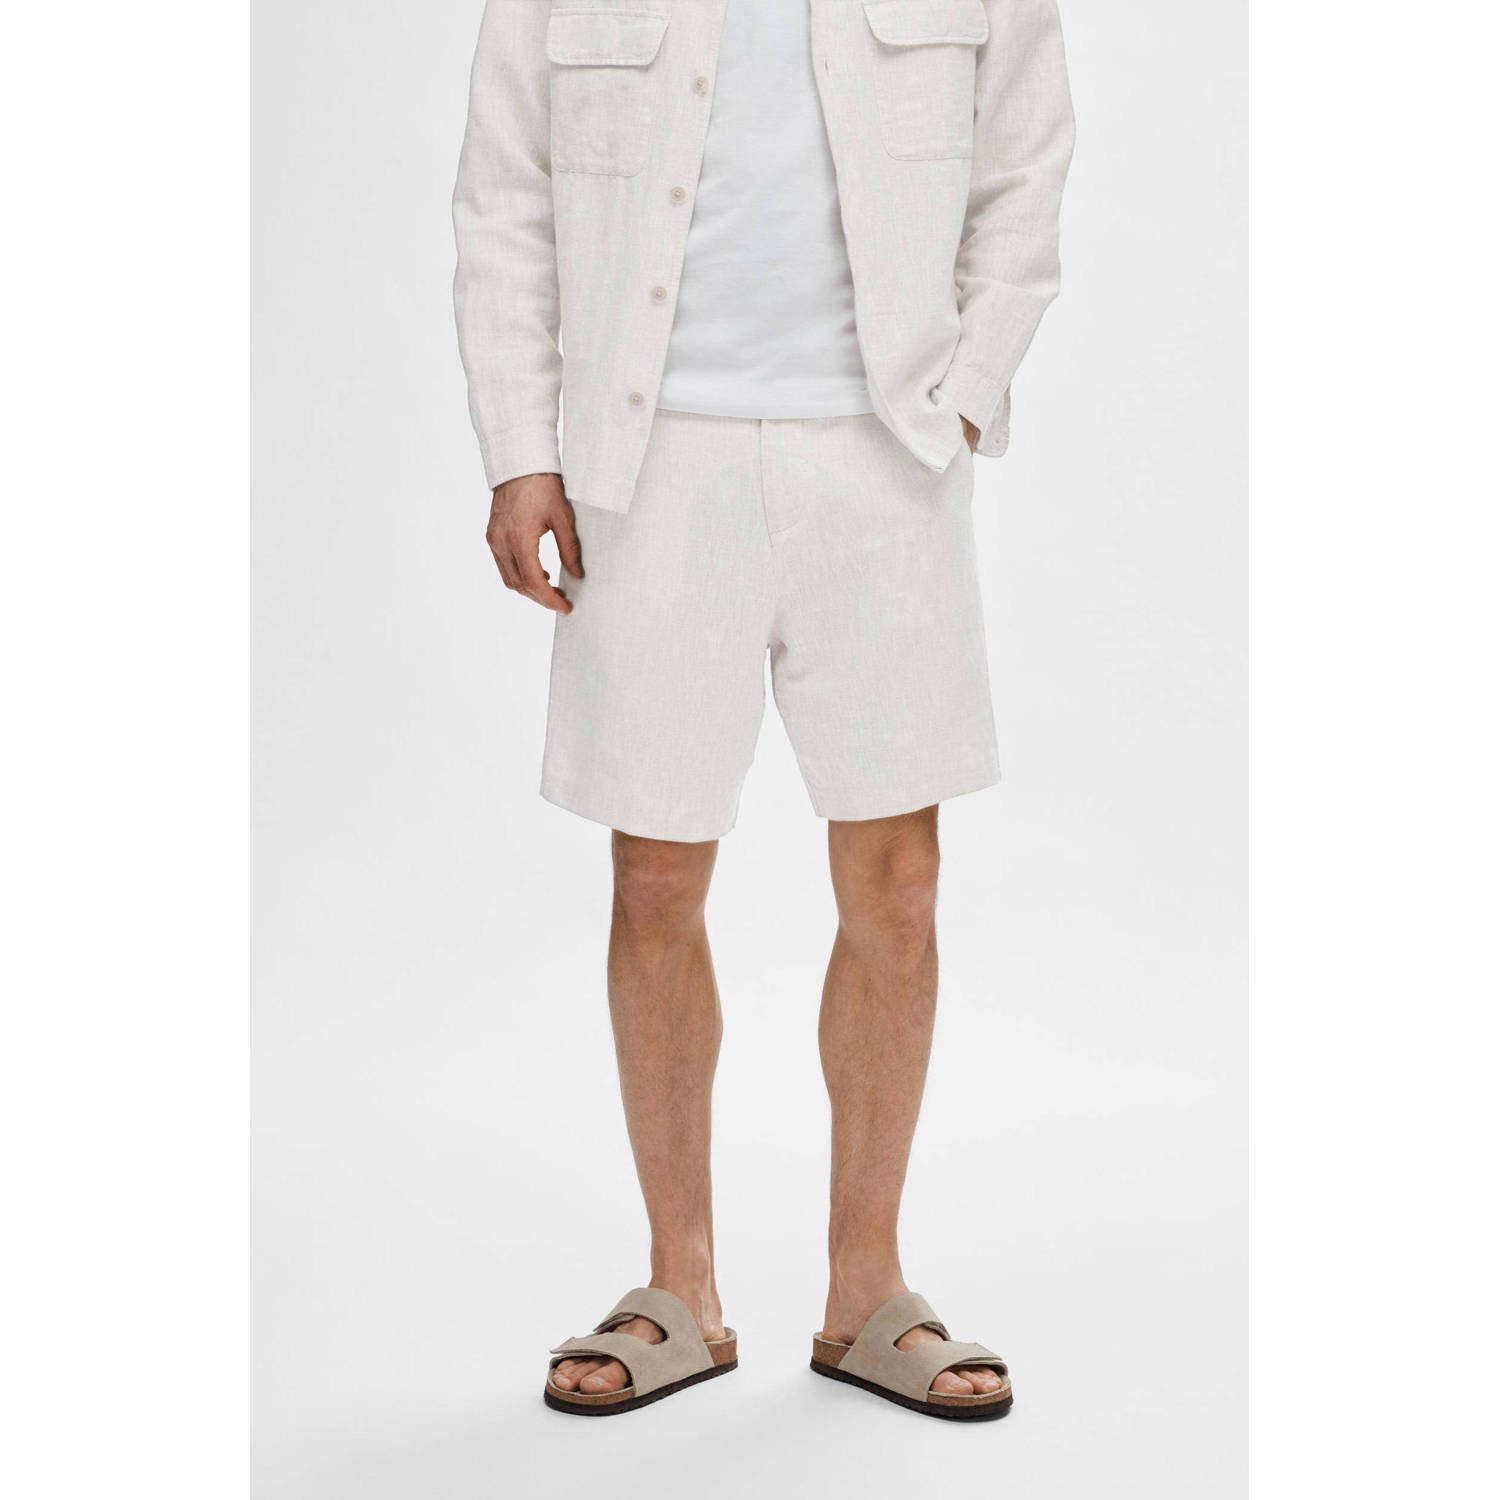 SELECTED HOMME regular fit short MADS pure cashmere